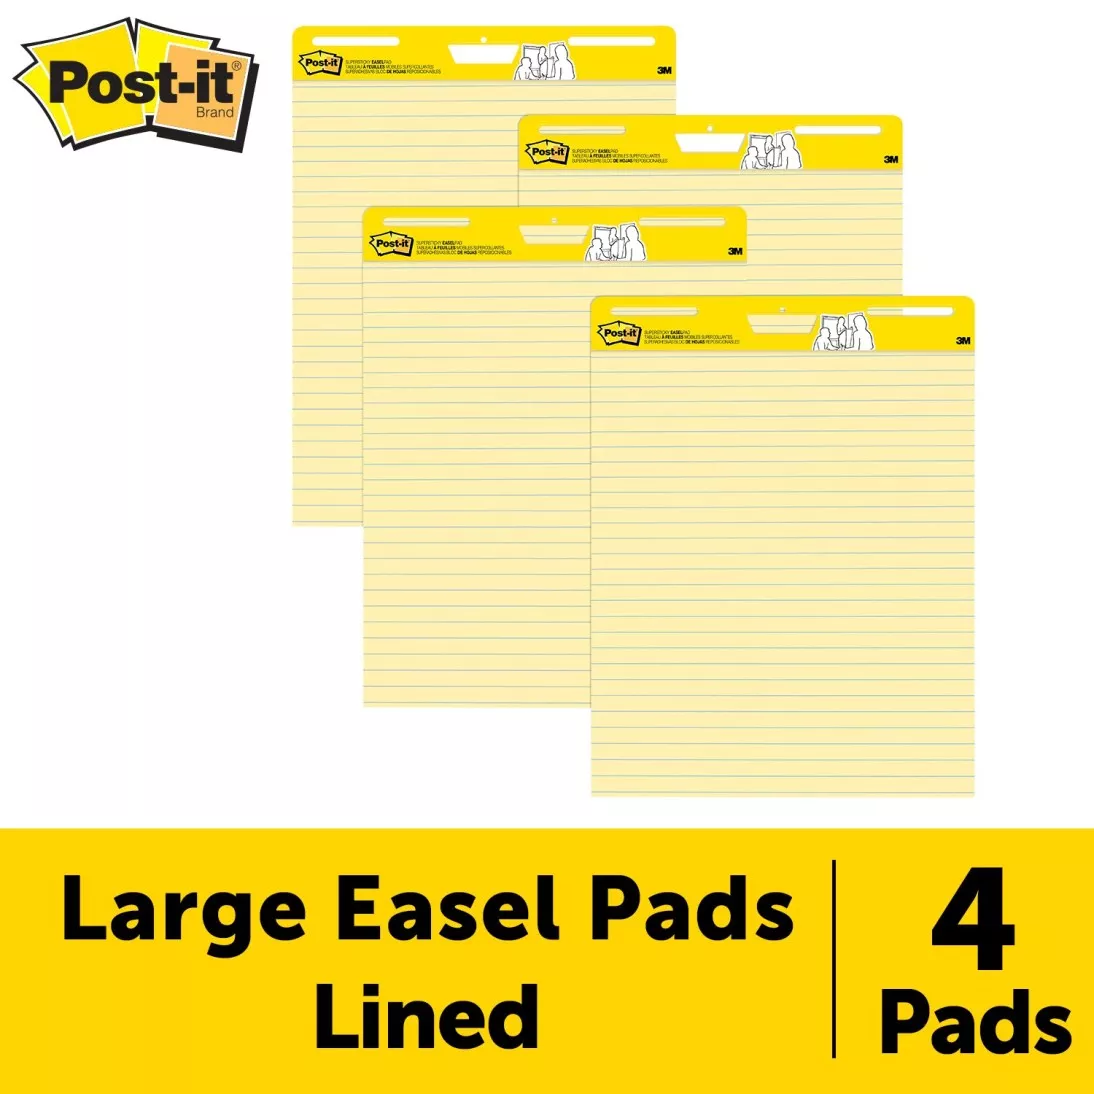 Post-it® Super Sticky Easel Pad 561 VAD 4PK, 25 in. x 30 in., Canary
Yellow Ruled